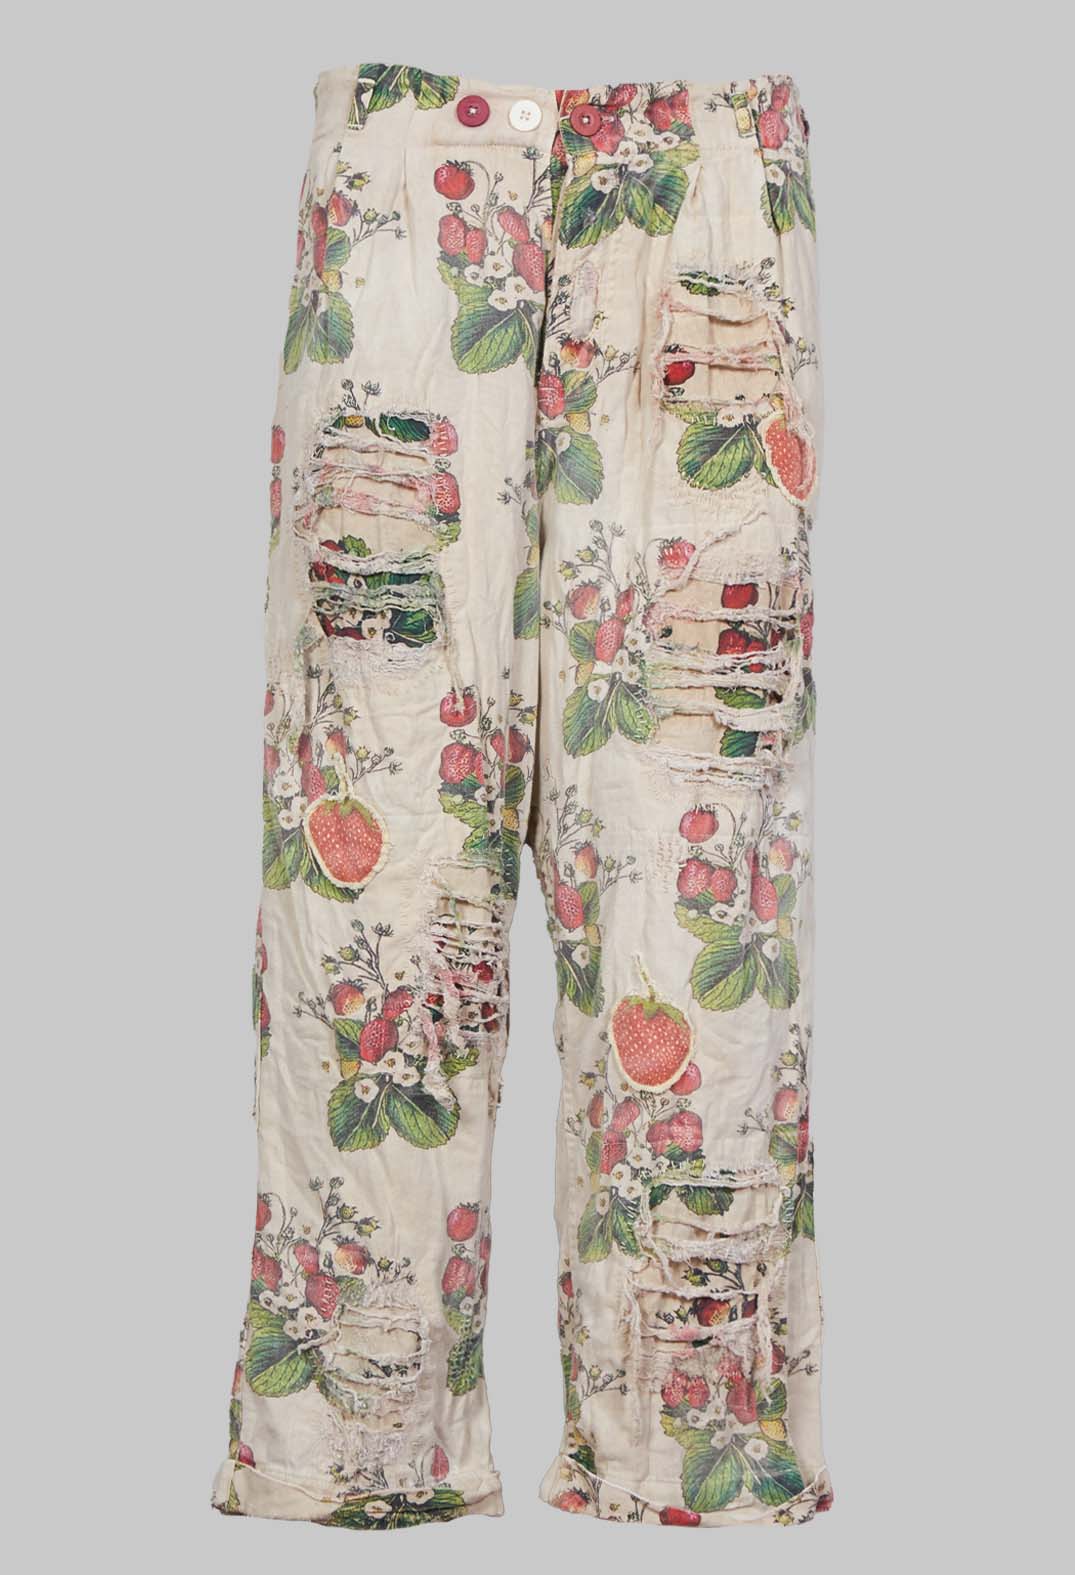 Charmie Trousers in Bloomberry